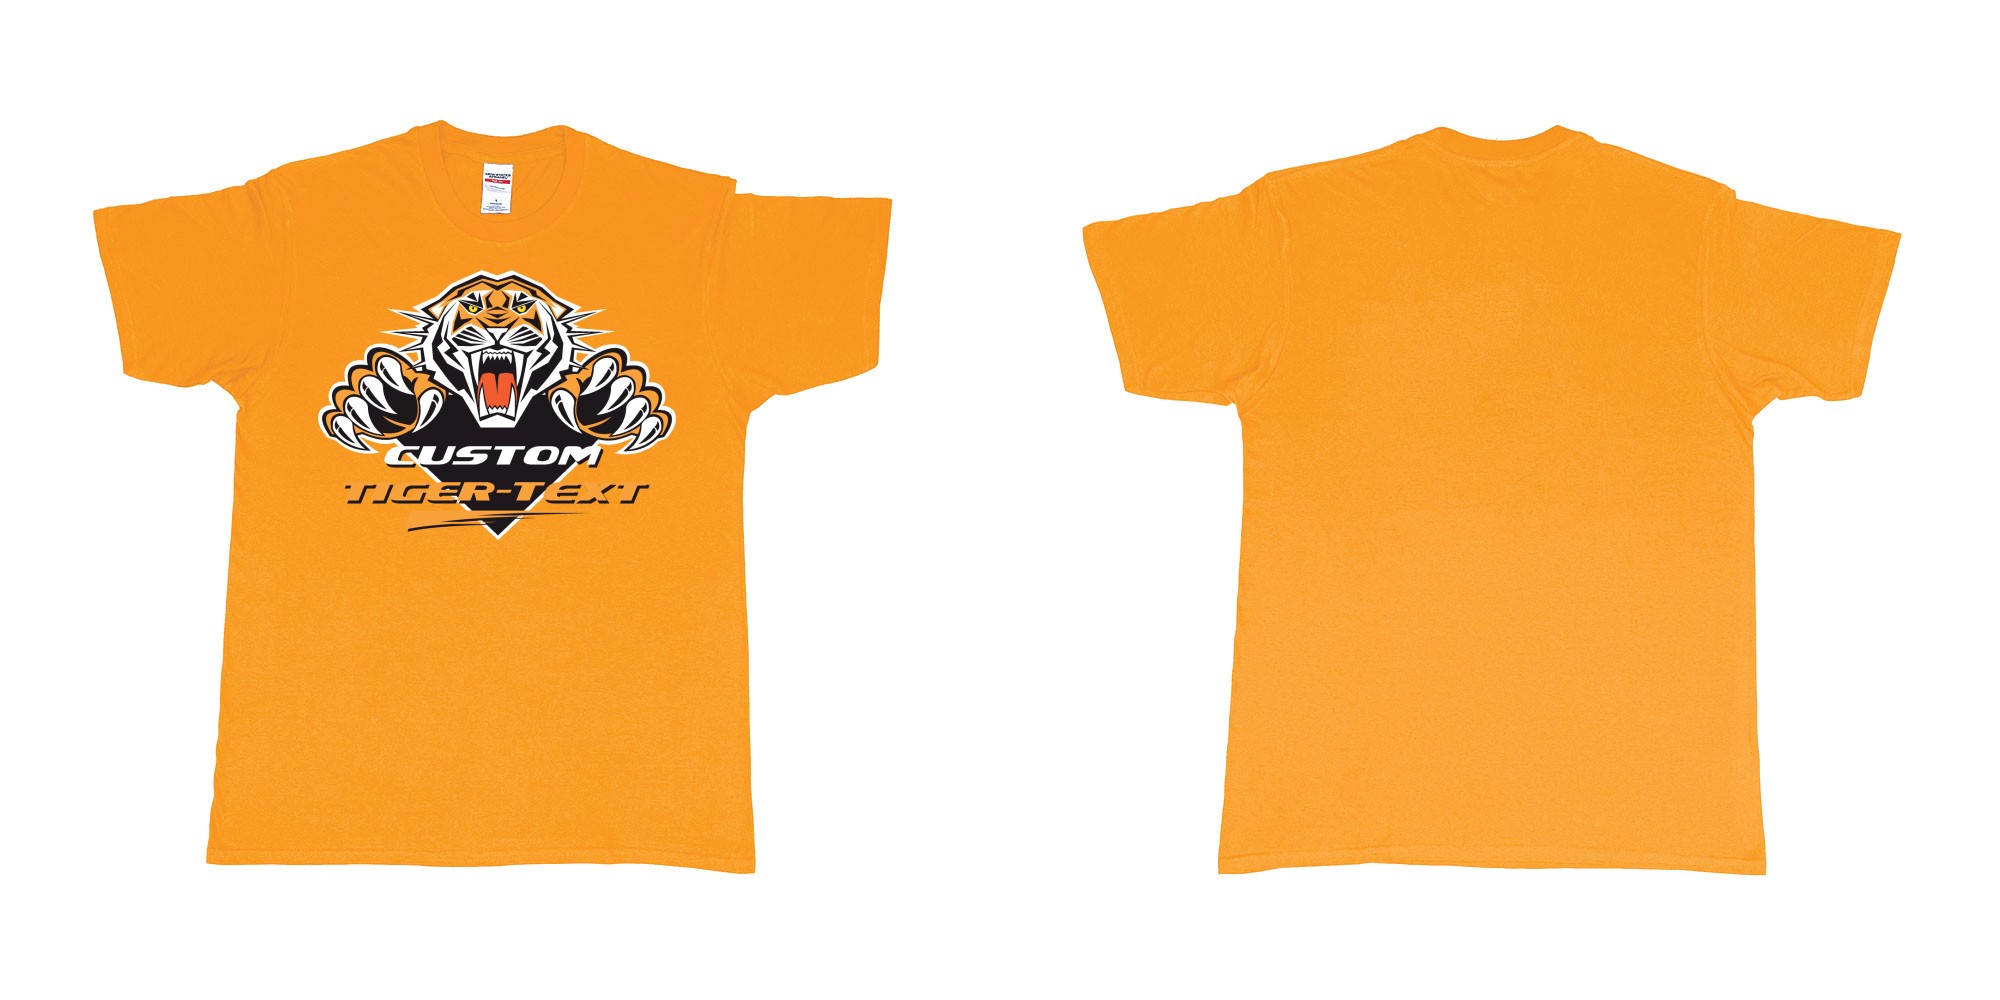 Custom tshirt design the wests tigers sydney national rugby league custom tshirt print in fabric color gold choice your own text made in Bali by The Pirate Way